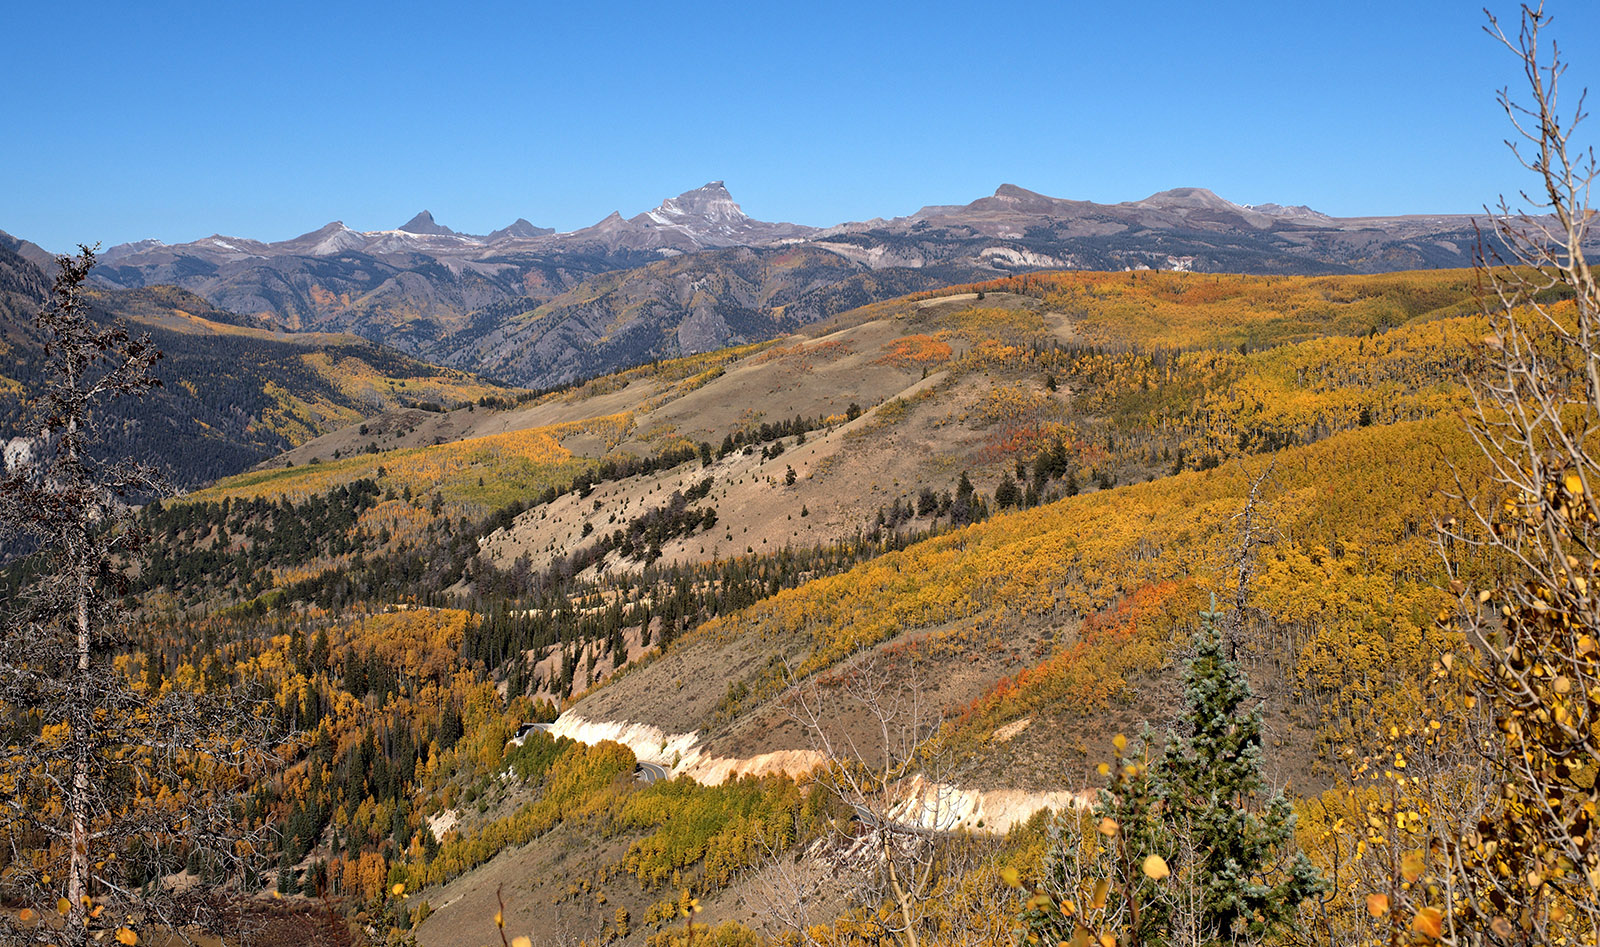 Looking West from Windy Point overlook towards the San Juan Mountains.  The tallest peak is Uncompahgre Peak.  Most of the peaks are from middle-phase Tertiary lava flows.